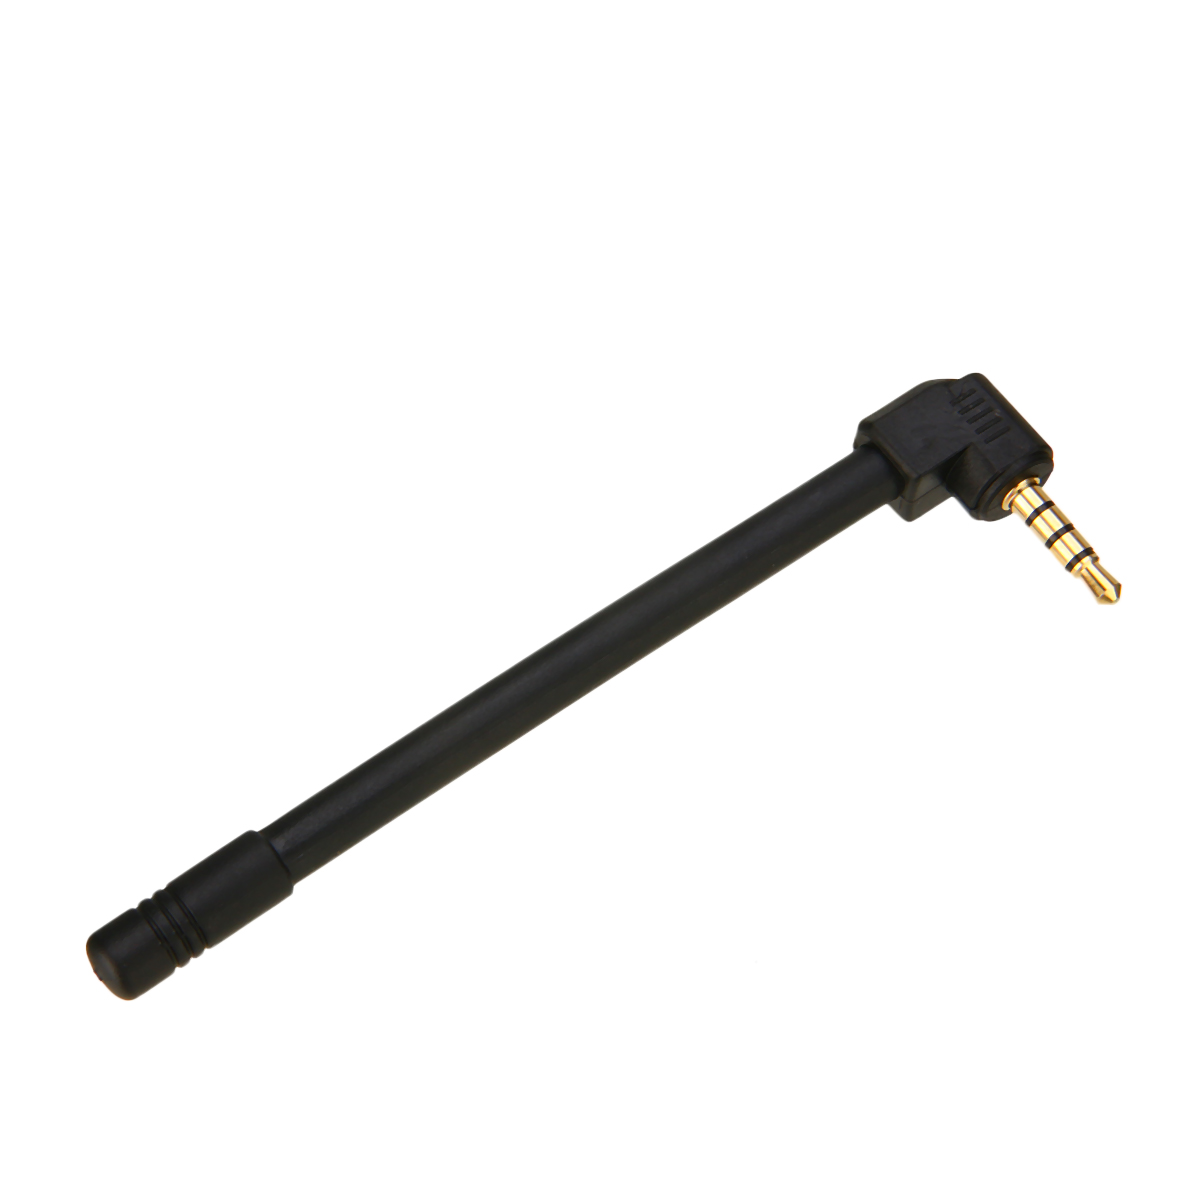 Universal For Mobile Phone External Antenna 3.5mm Male Wireless Antenna Signal Strengthen Booster 5DBI For GPS TV Accessories